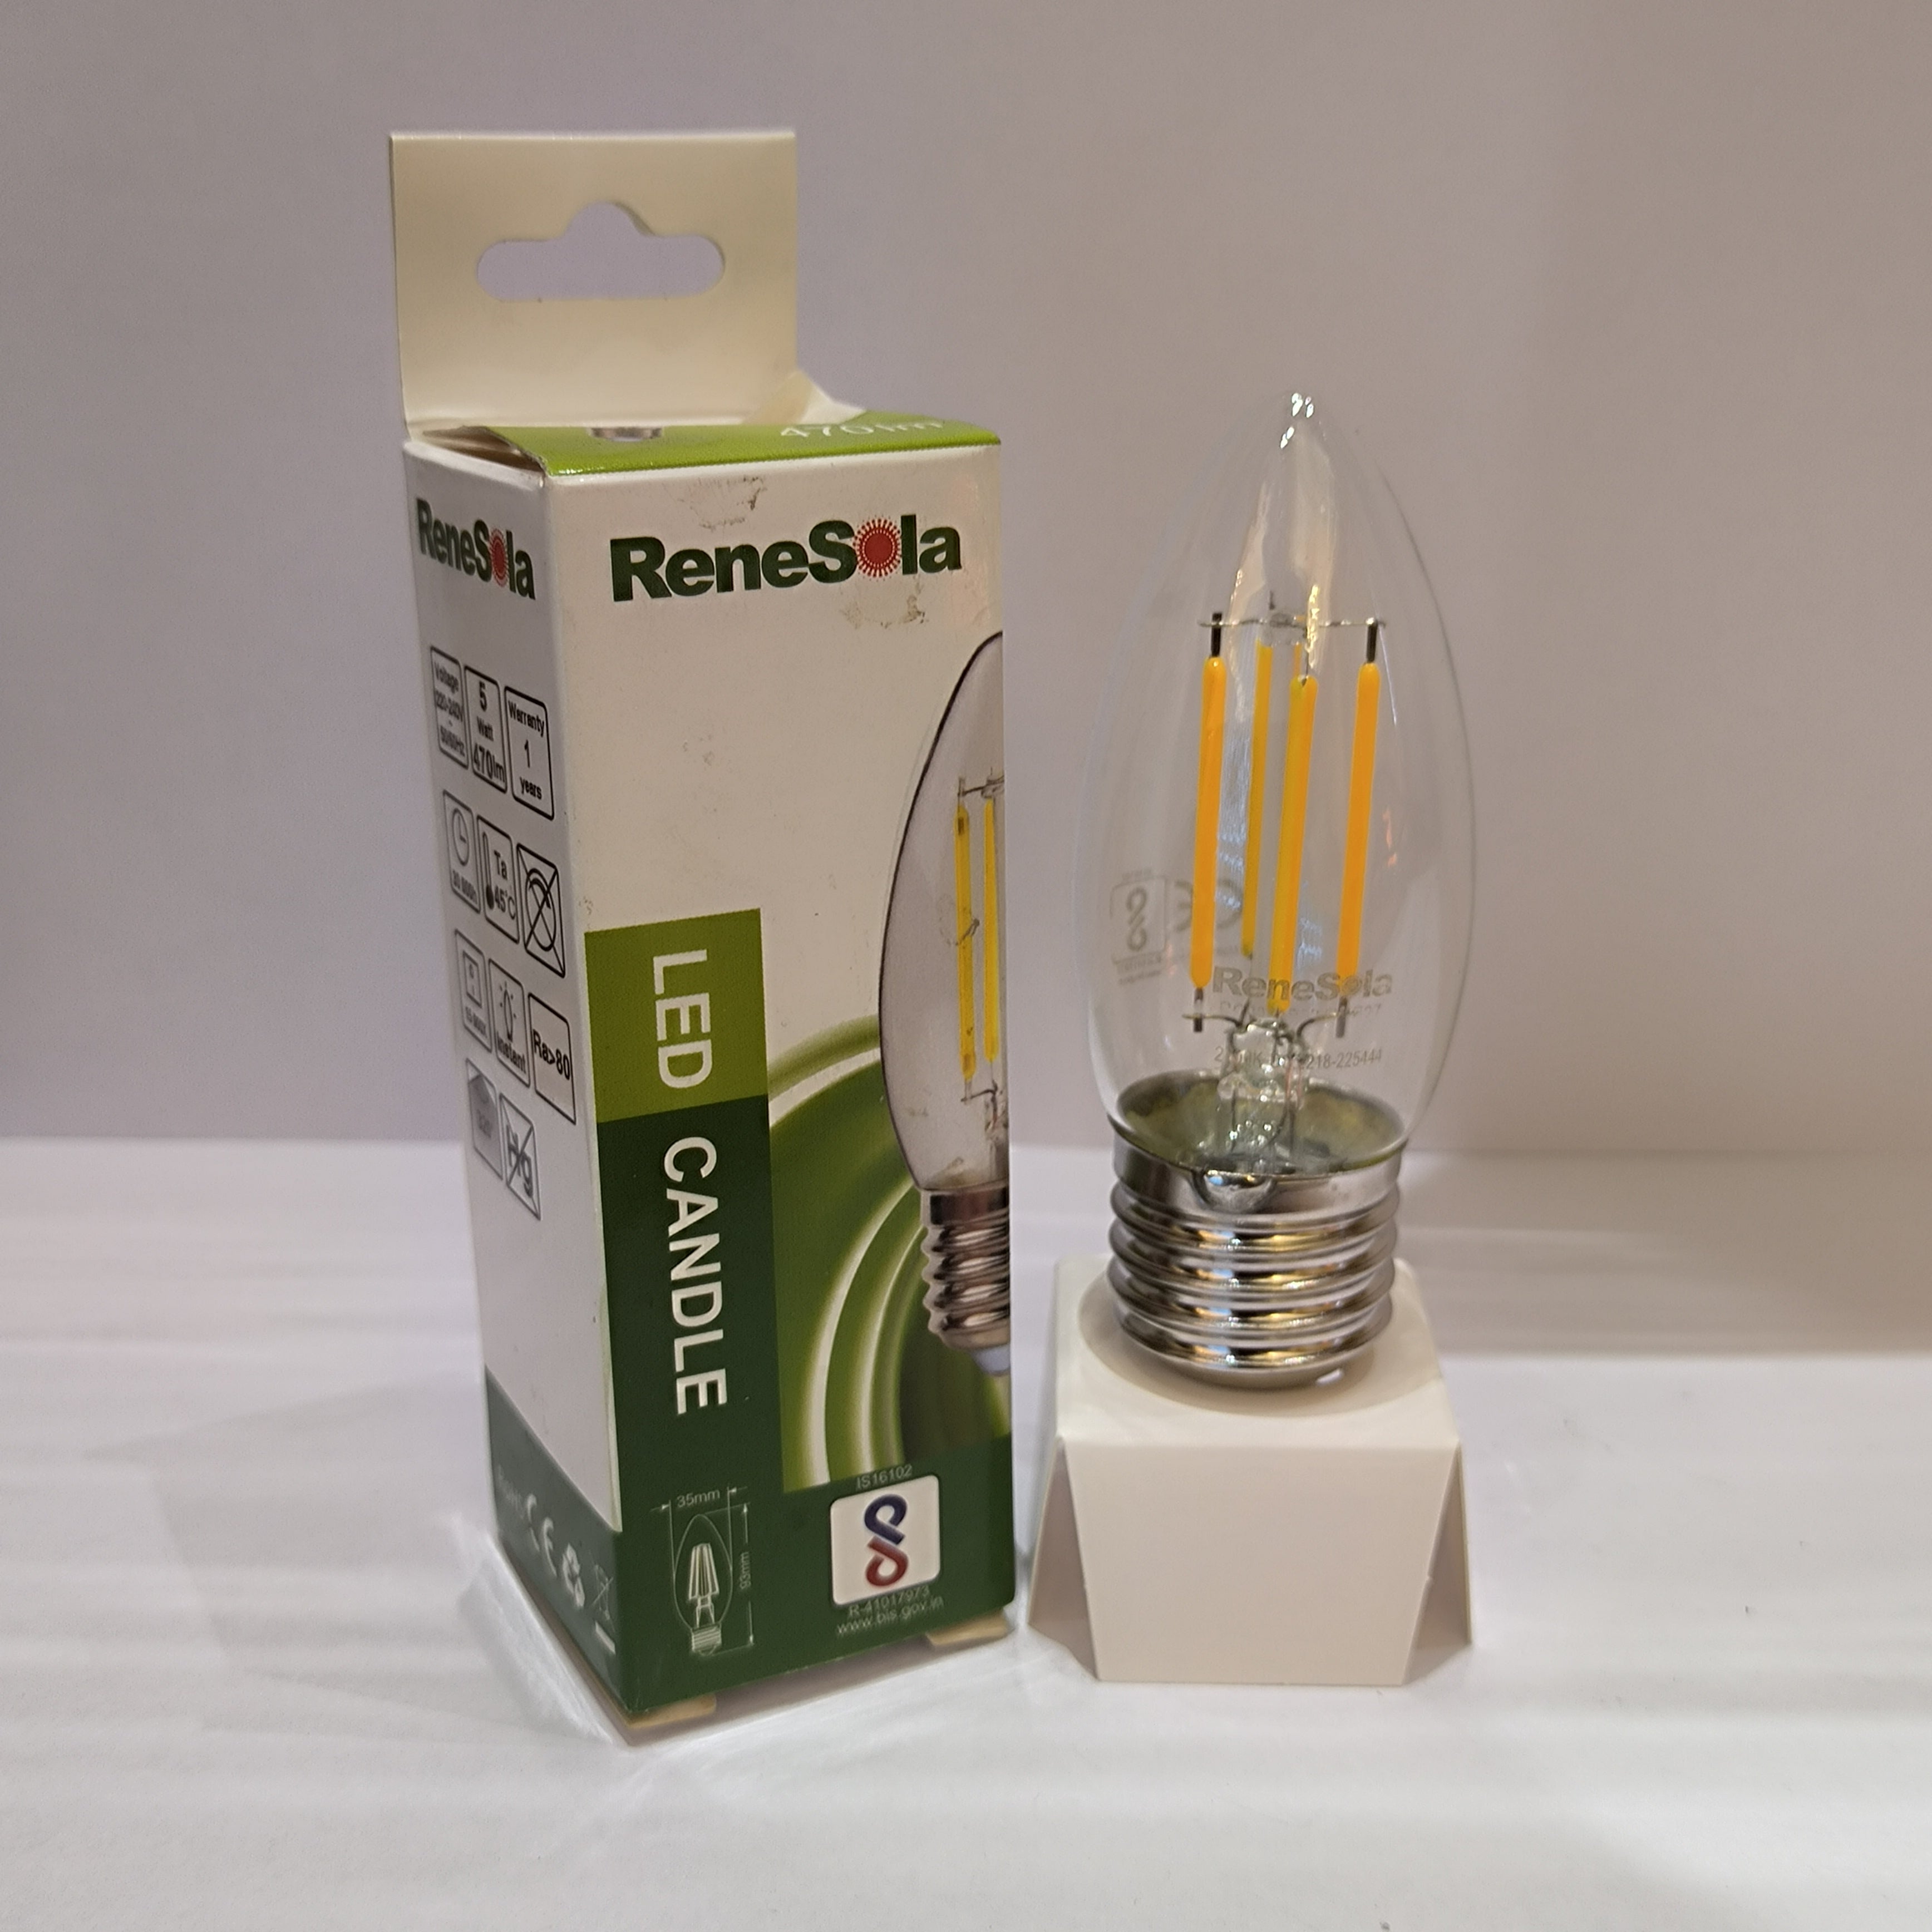 Renesola E-27 LED Candel Bulb 5W Lumens with Exceptional Price